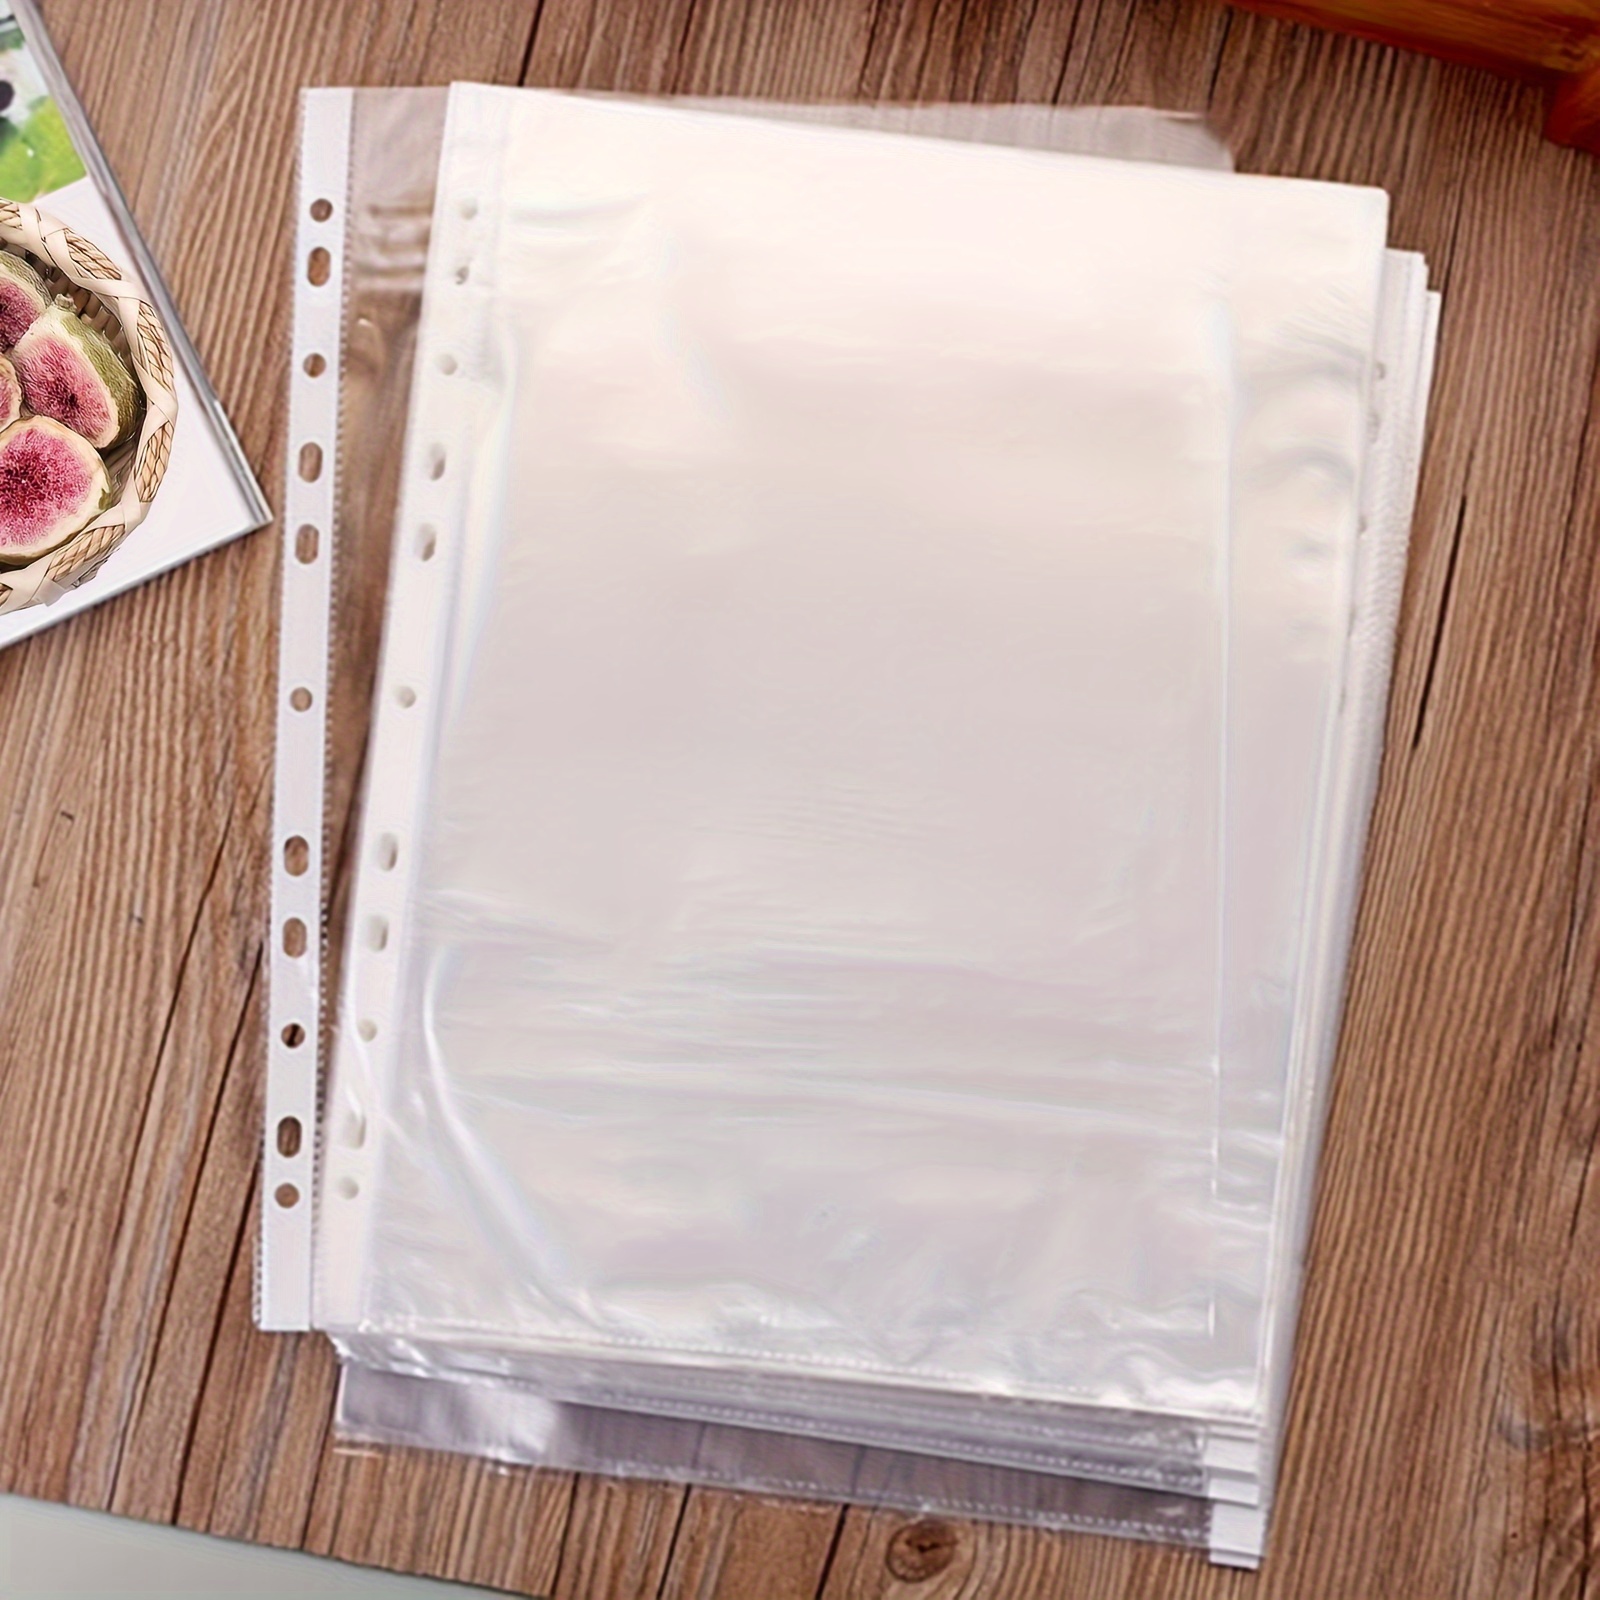 

100pcs Simple Transparency High Easy Storage Multi-purpose Reusable Pp Material A4 Waterproof Box Paper Holder Suitable For Office/learning/organizing Etc (hand Measurement, Error In 1-3mm)